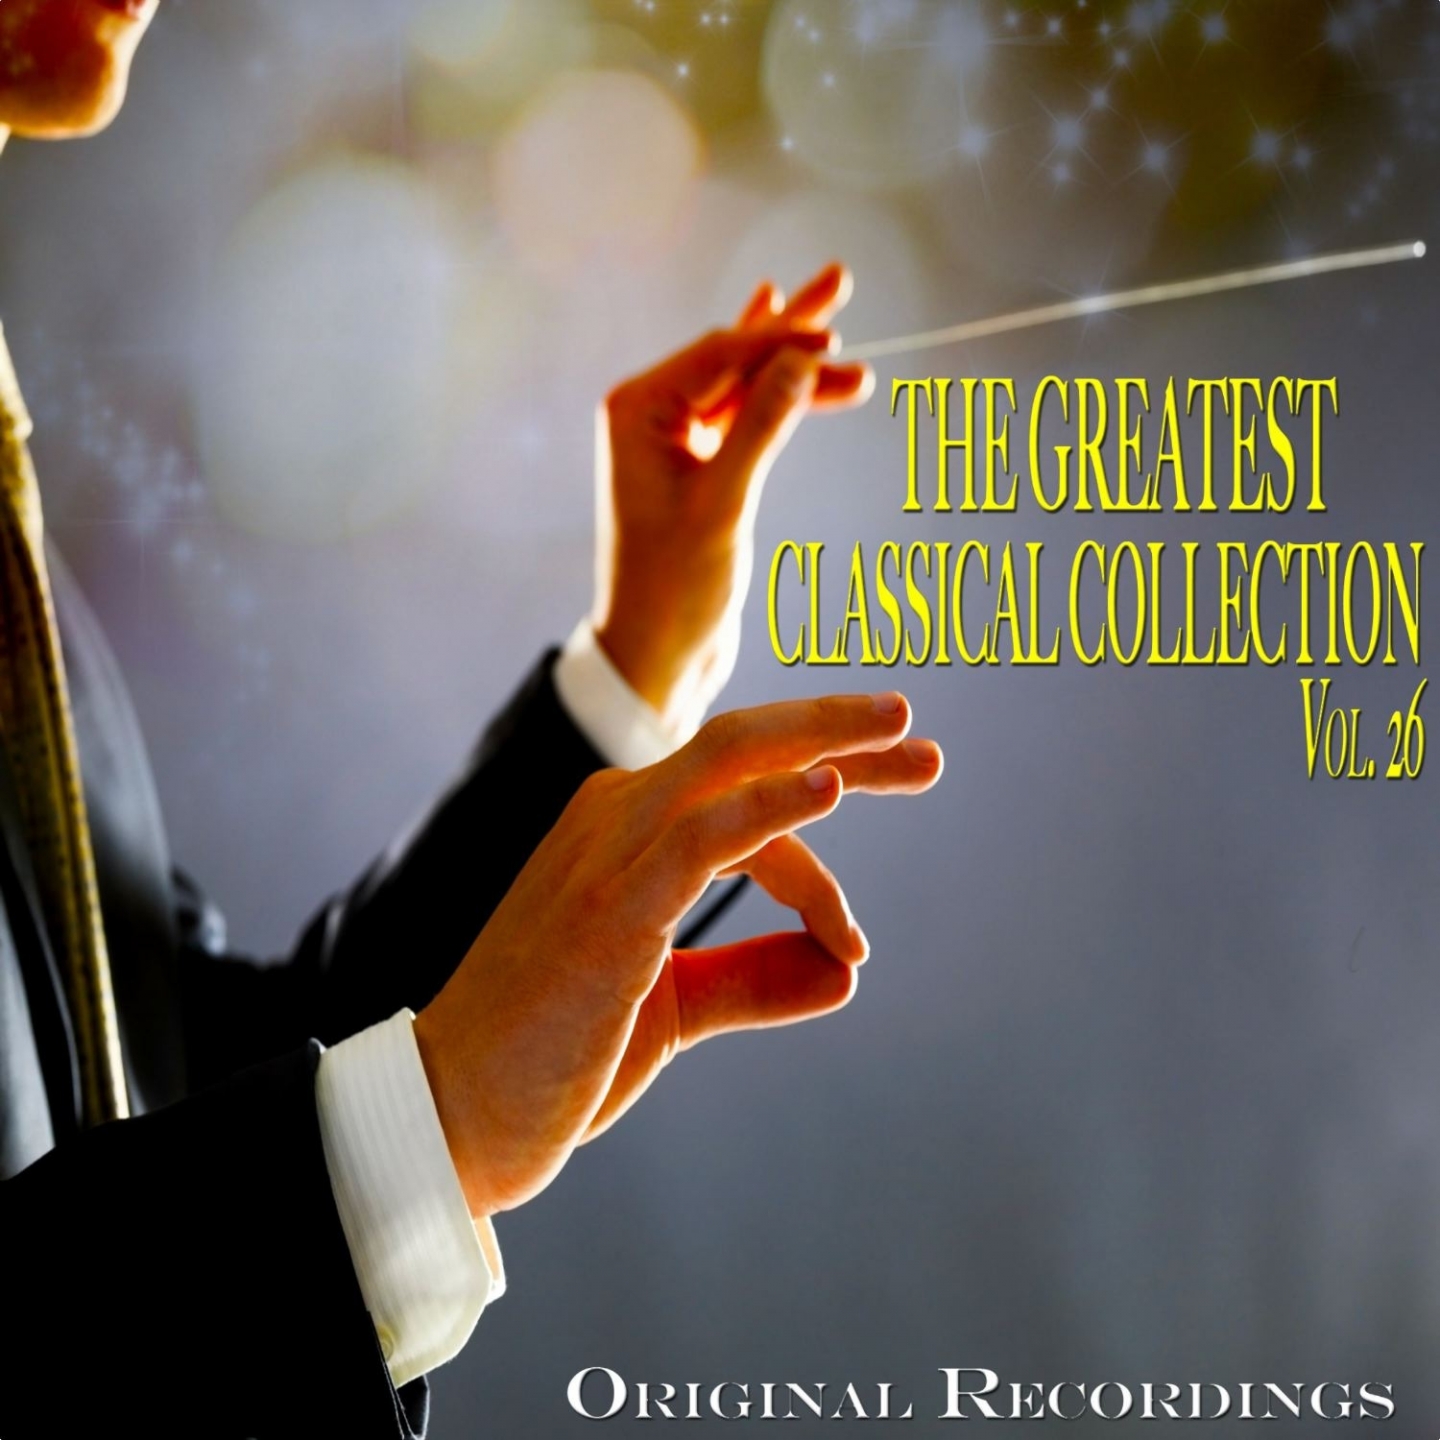 The Greatest Classical Collection Vol. 26